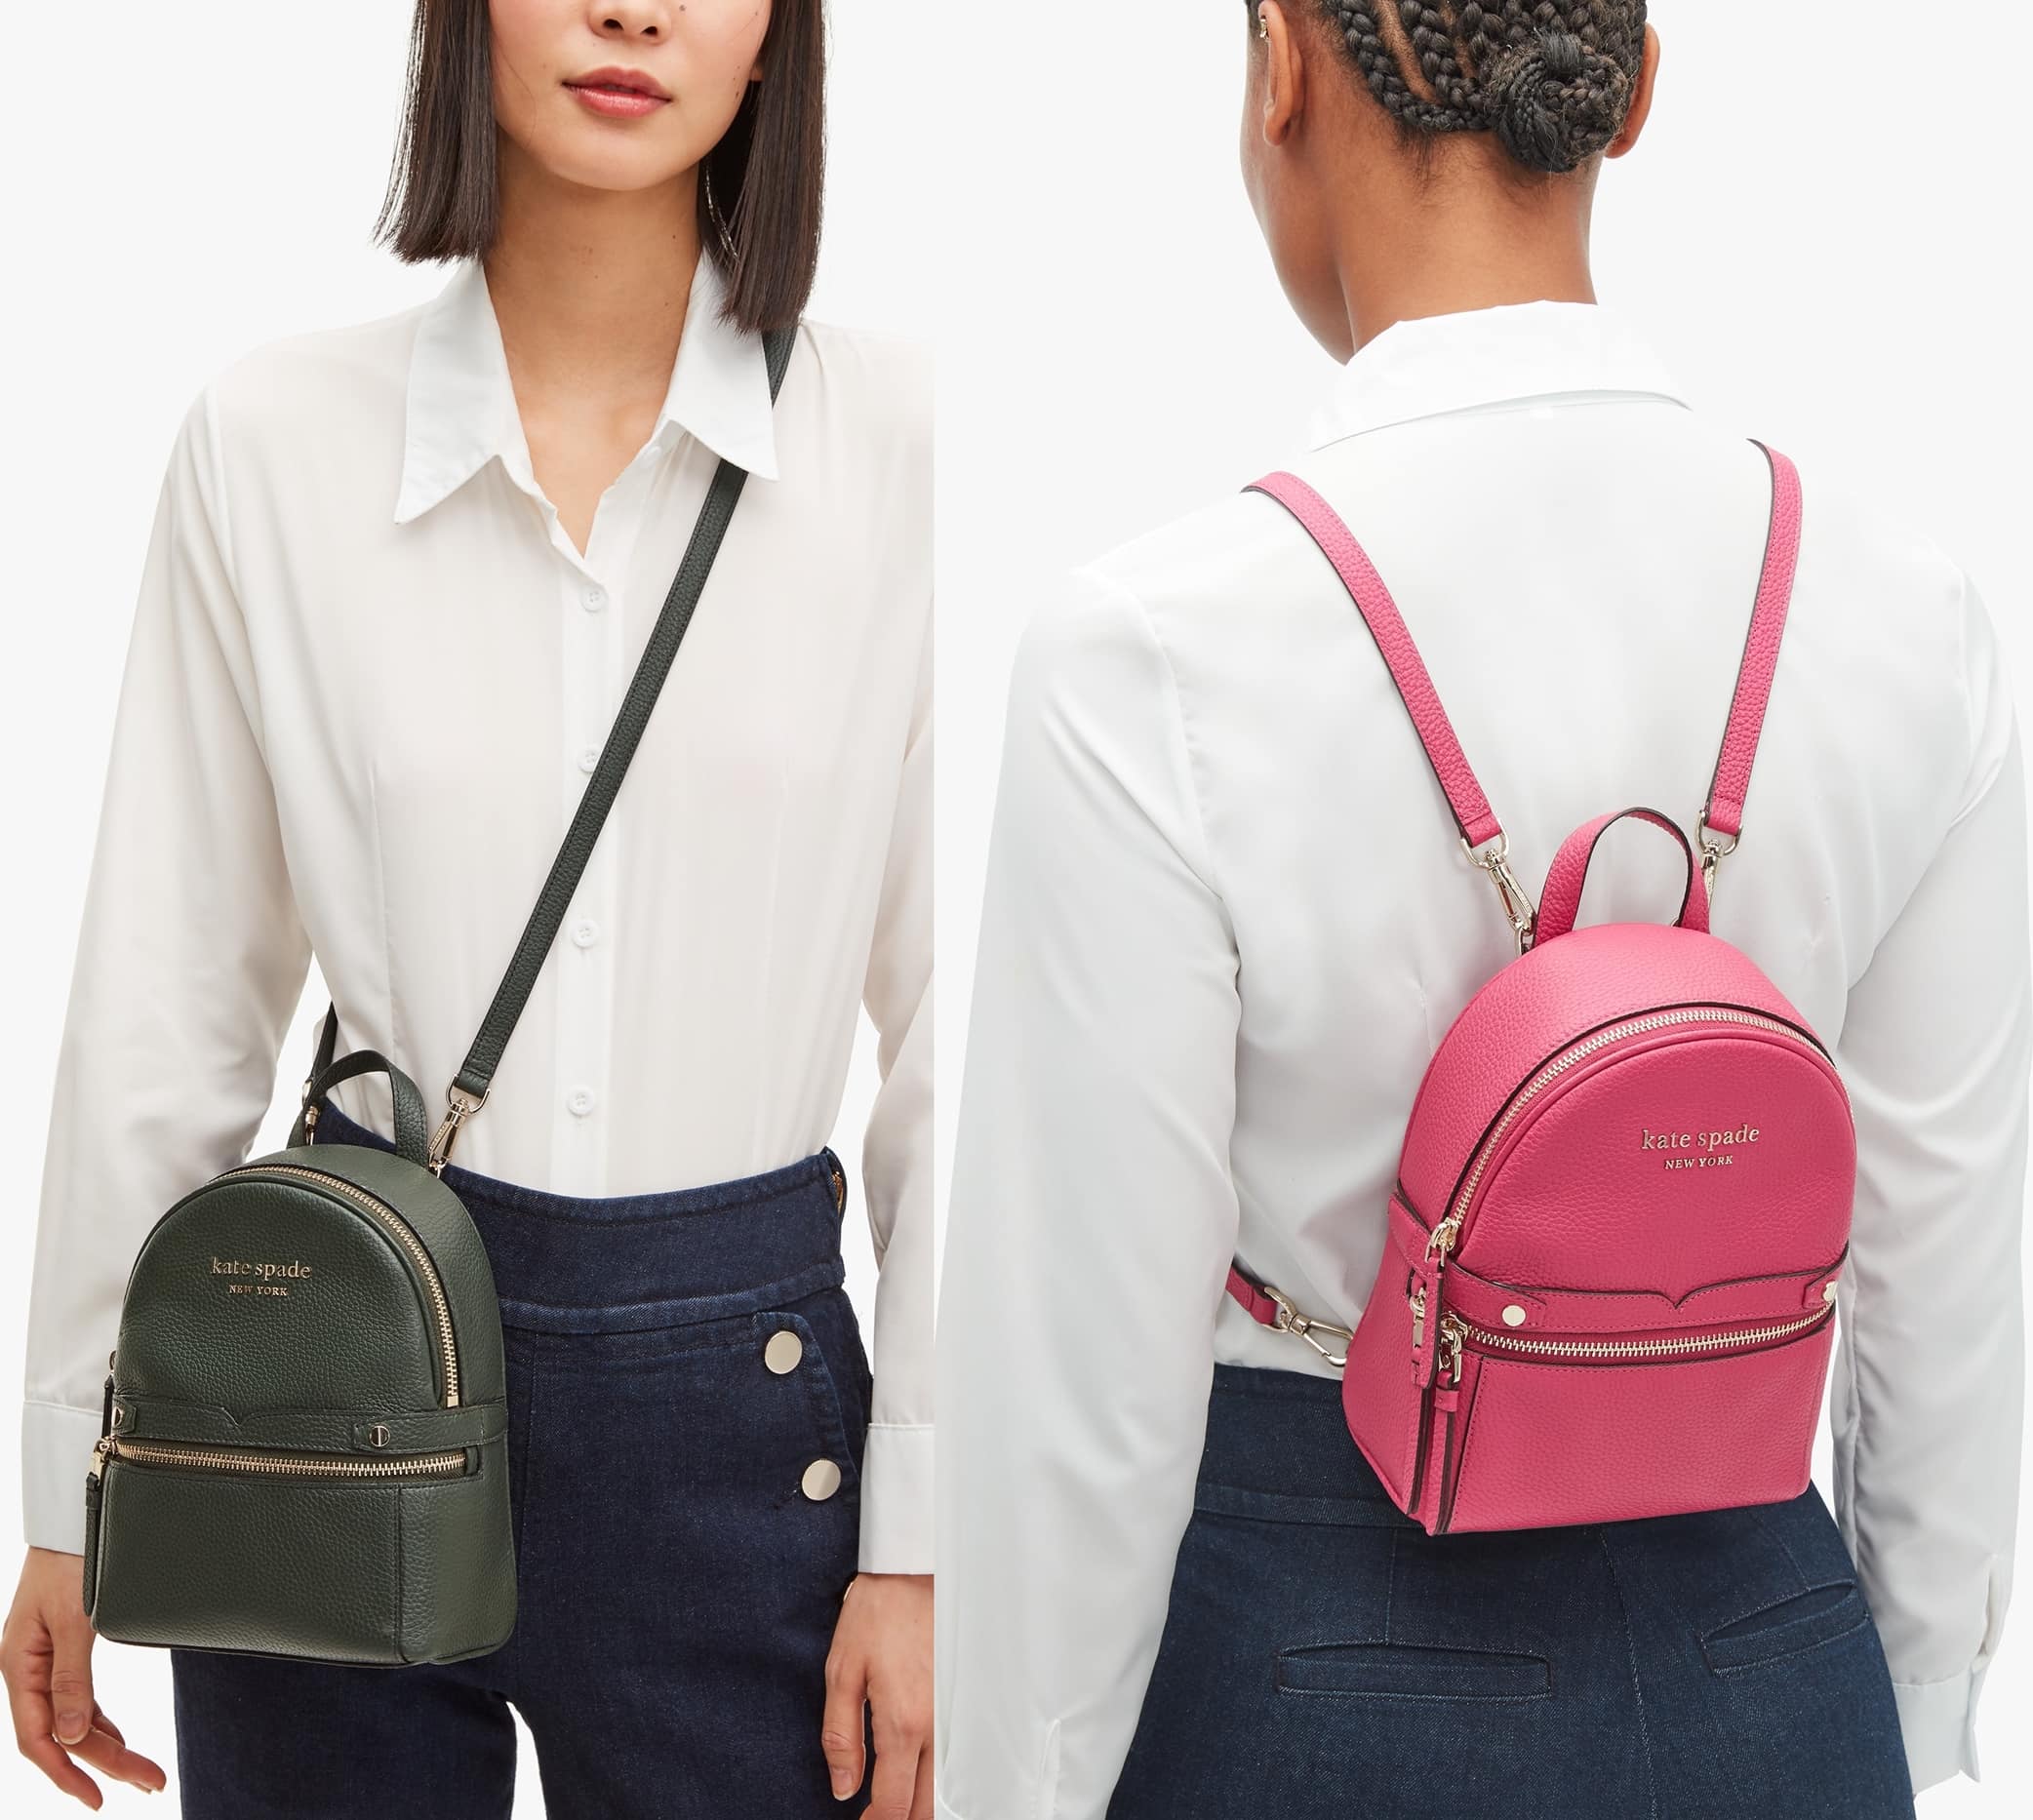 This mini convertible backpack can be transformed into a crossbody or shoulder bag